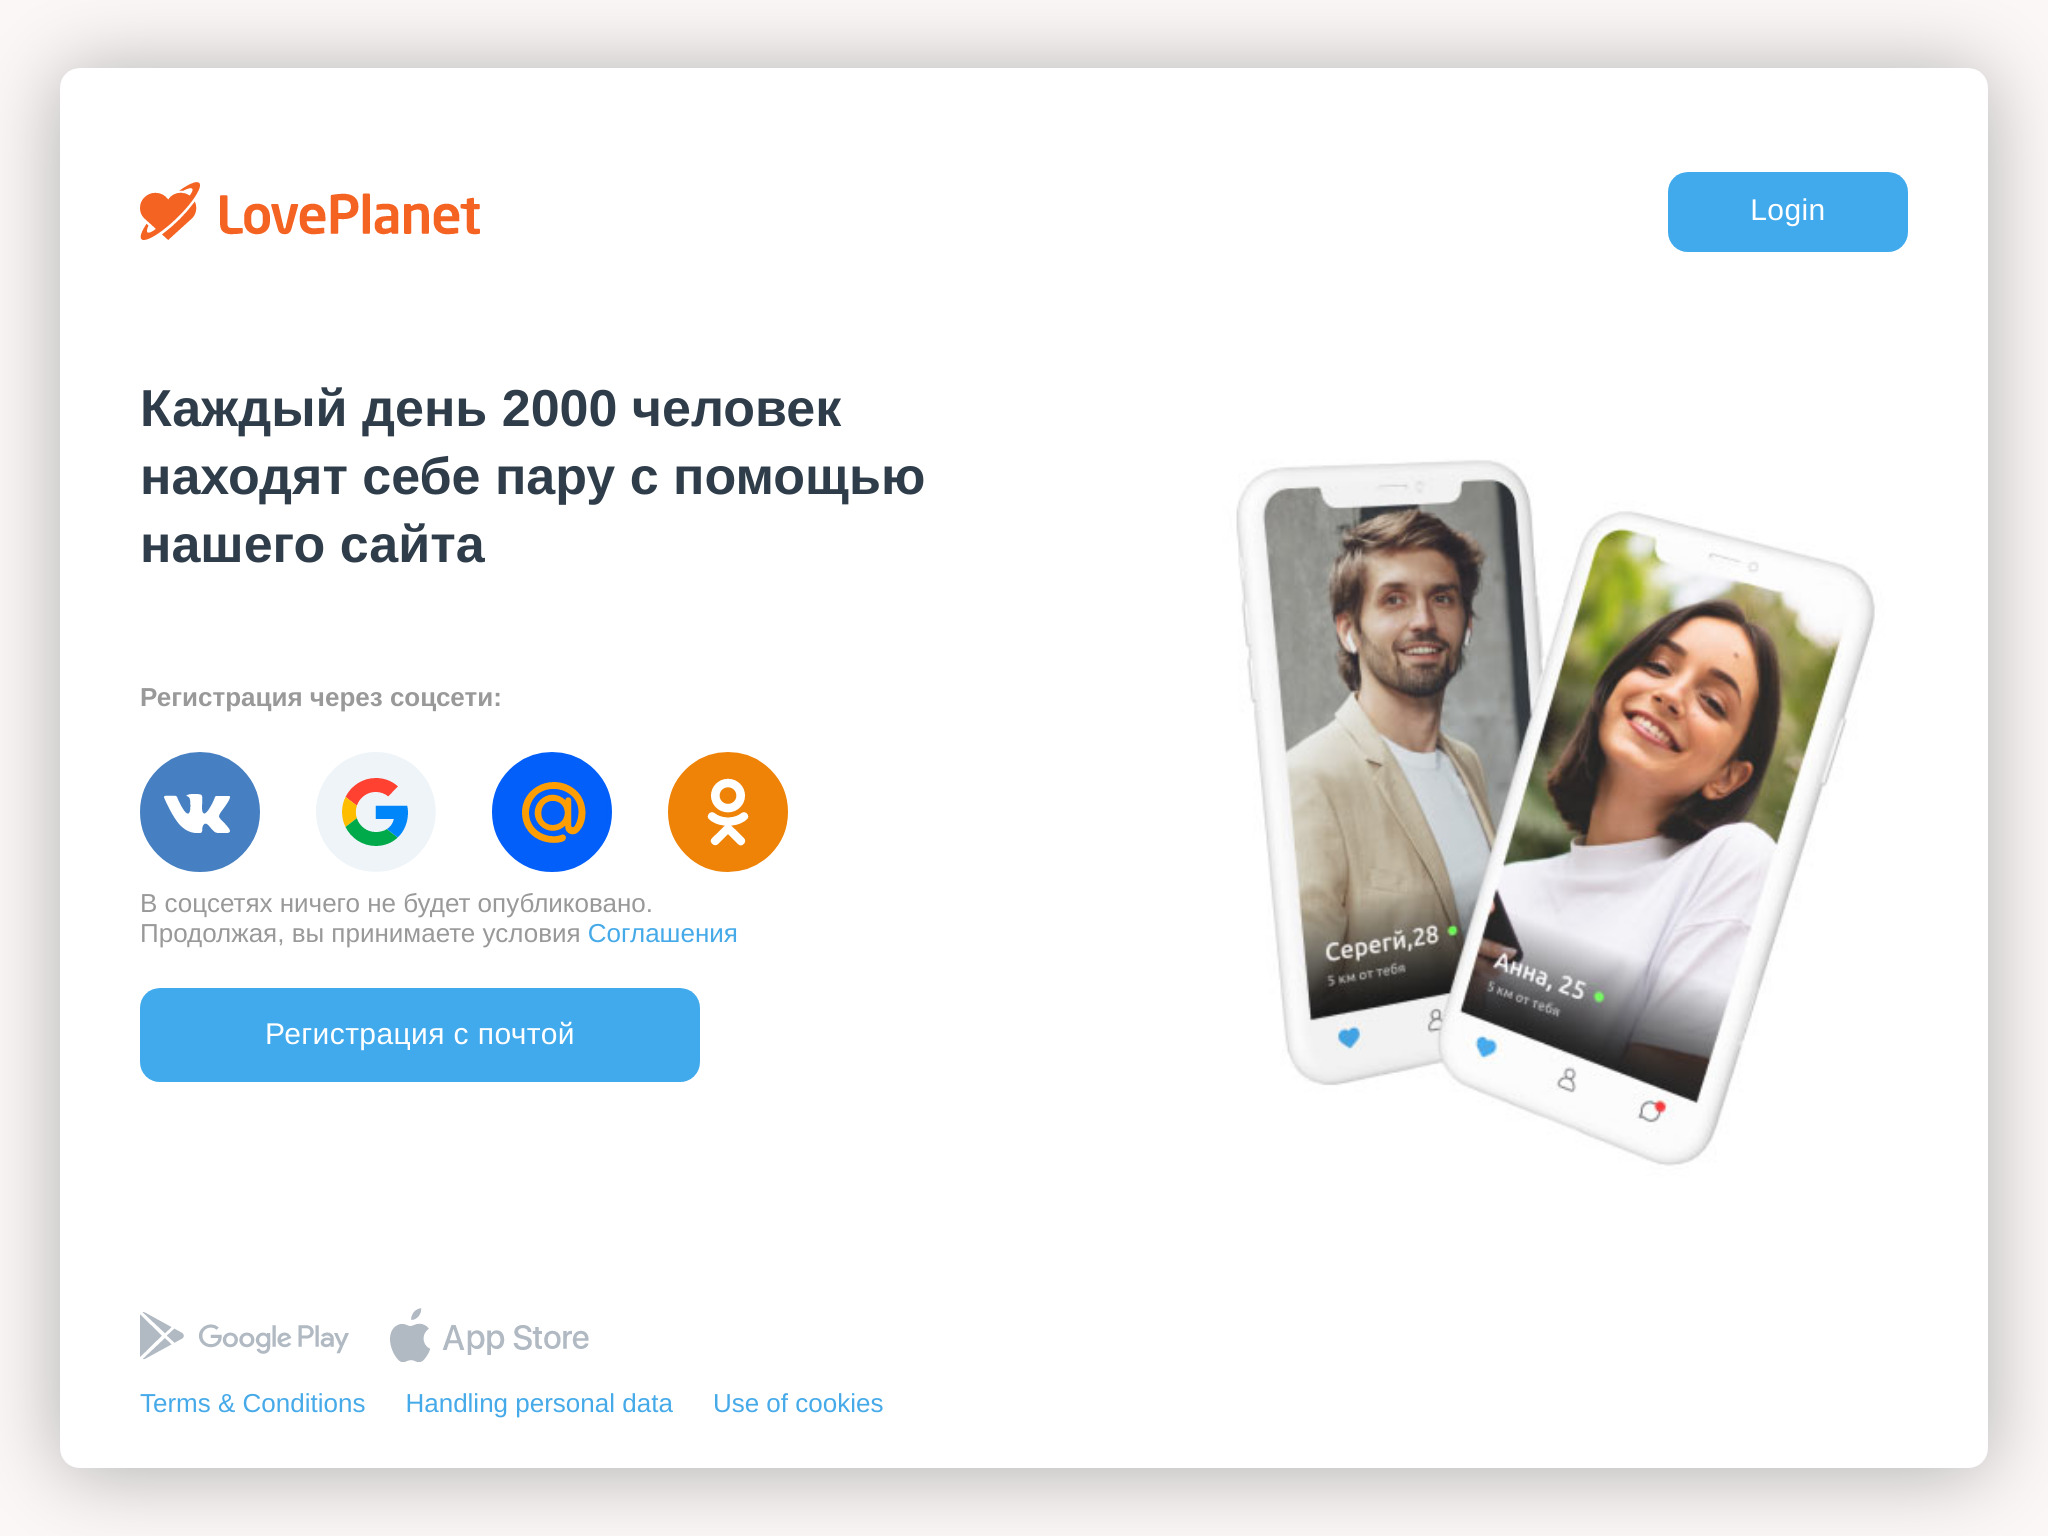 LovePlanet Review in 2023 – Is It Worth It?